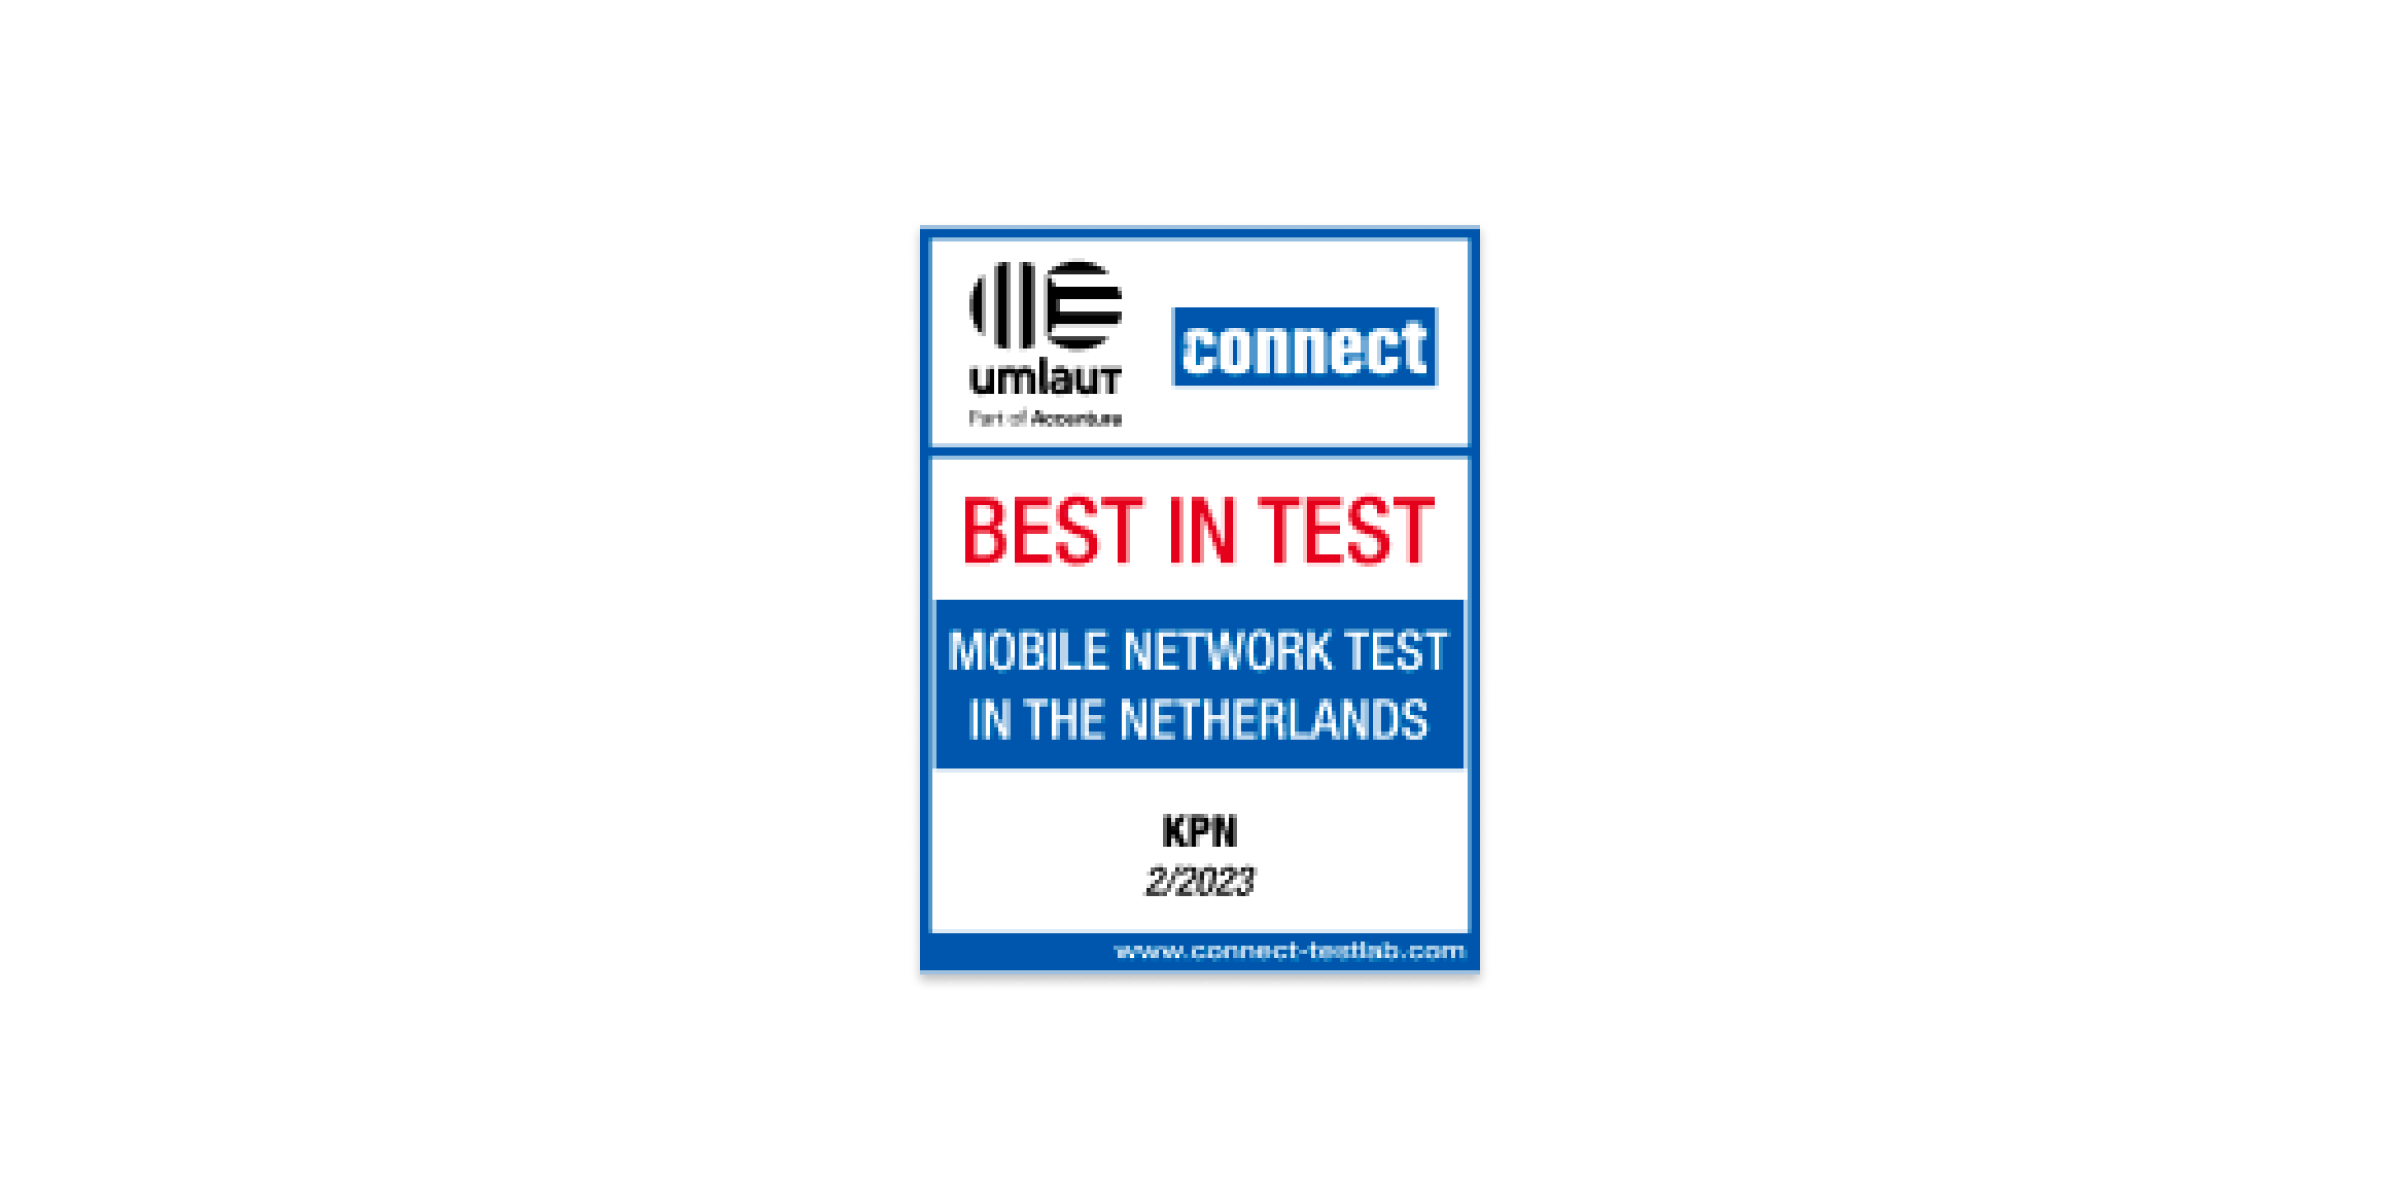 Umlaut connect, best in test: mobile network test in the Netherlands KPN 2/2023